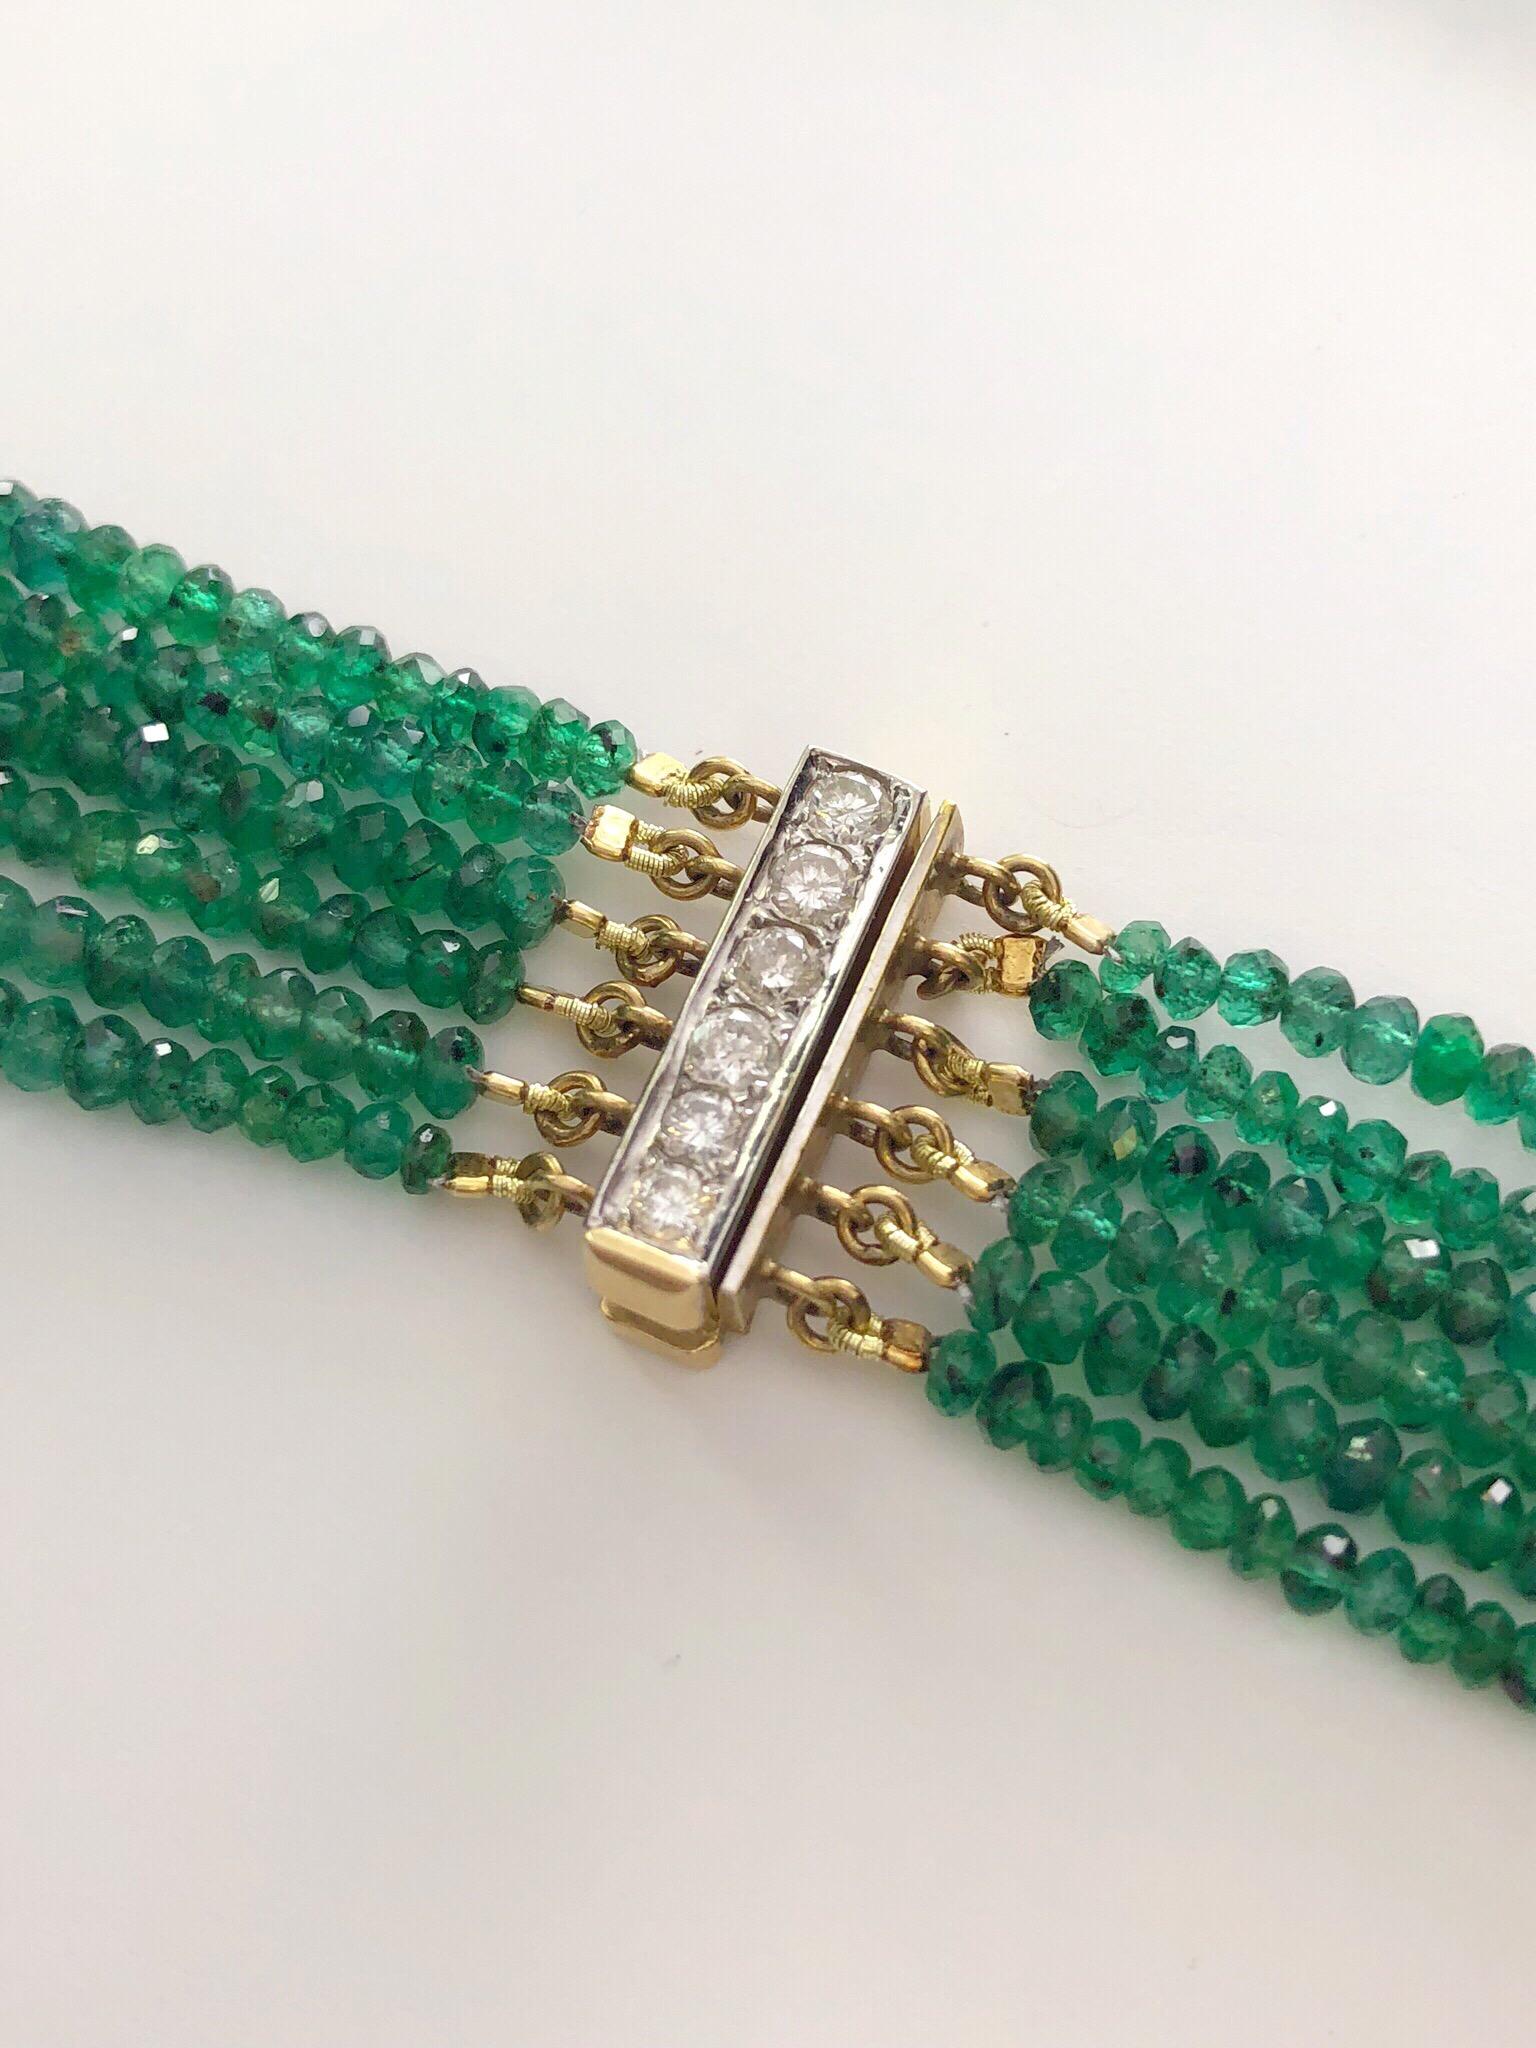 302 carats of graduating emerald beads glisten in this beautiful multi-strand bib necklace. The six strands of emeralds are held together by an 18 karat gold and round brilliant diamond clasp.
The beads graduate from 2.5 mm x 5 mm and the nesting